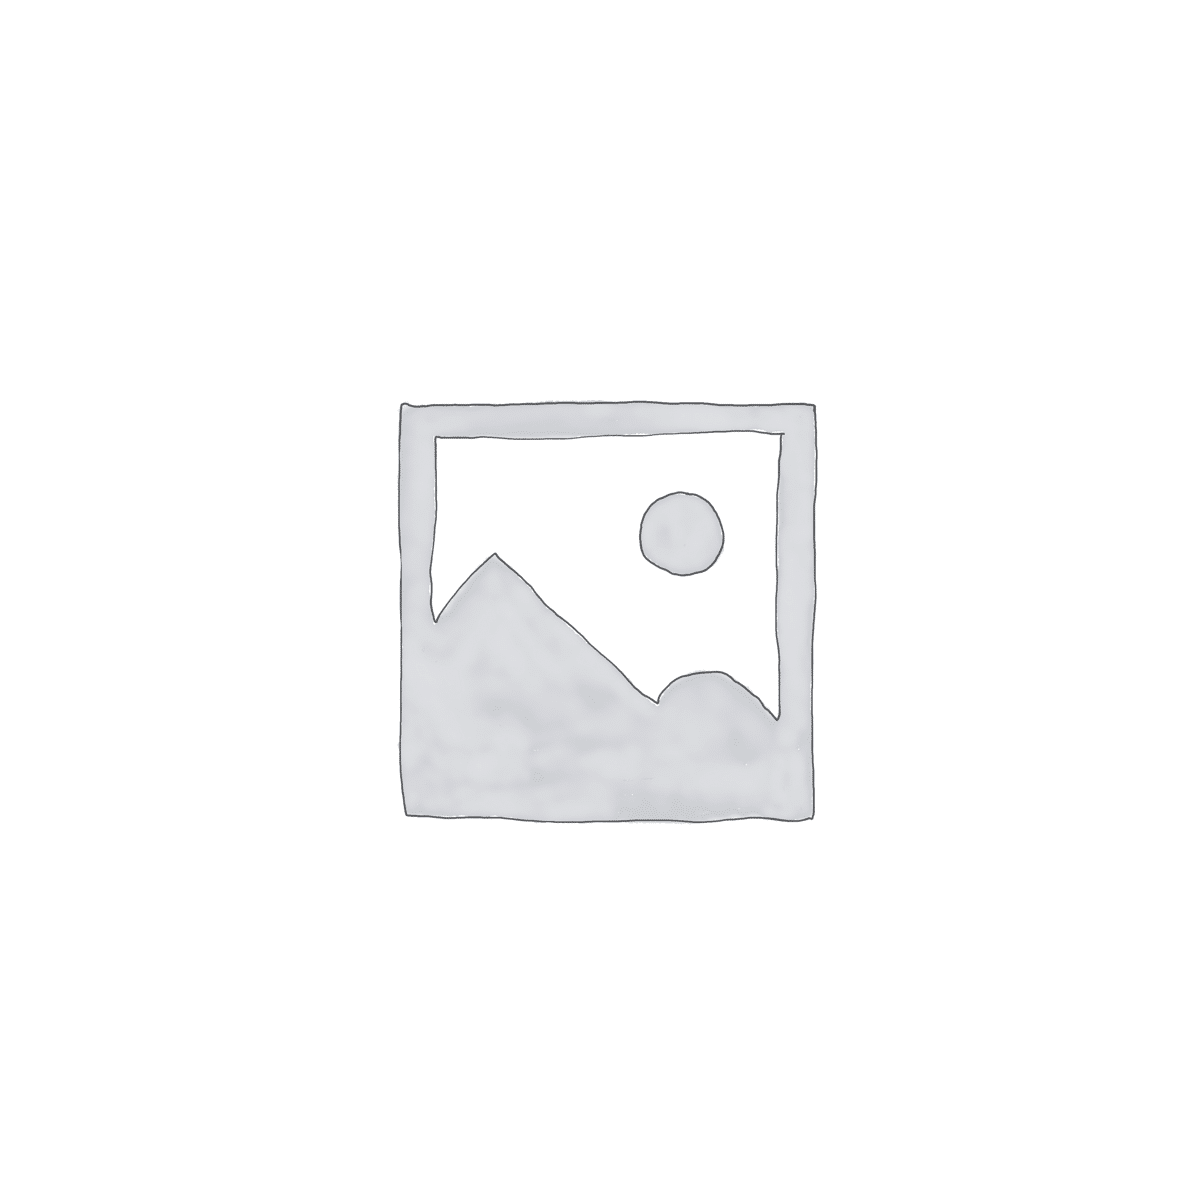 Grey sketch icon of a mountain and sun in a picture frame.